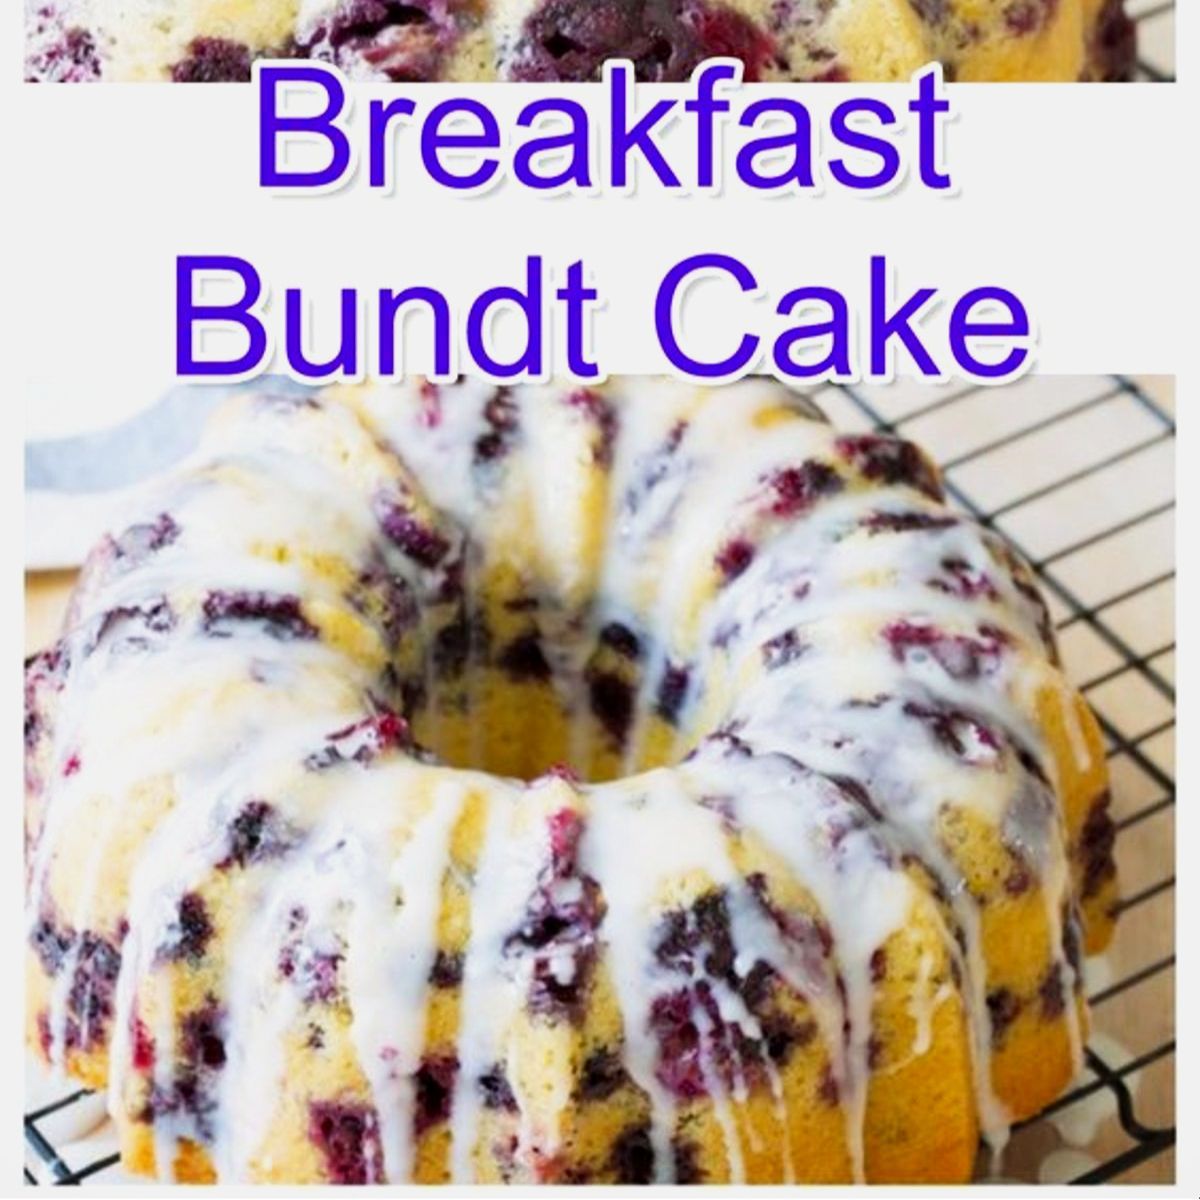 7 Easy Brunch Recipes For a Crowd - Breakfast Bundt Cake Recipes For A Stress-Free Brunch Party -   14 coffee cake Bundt ideas